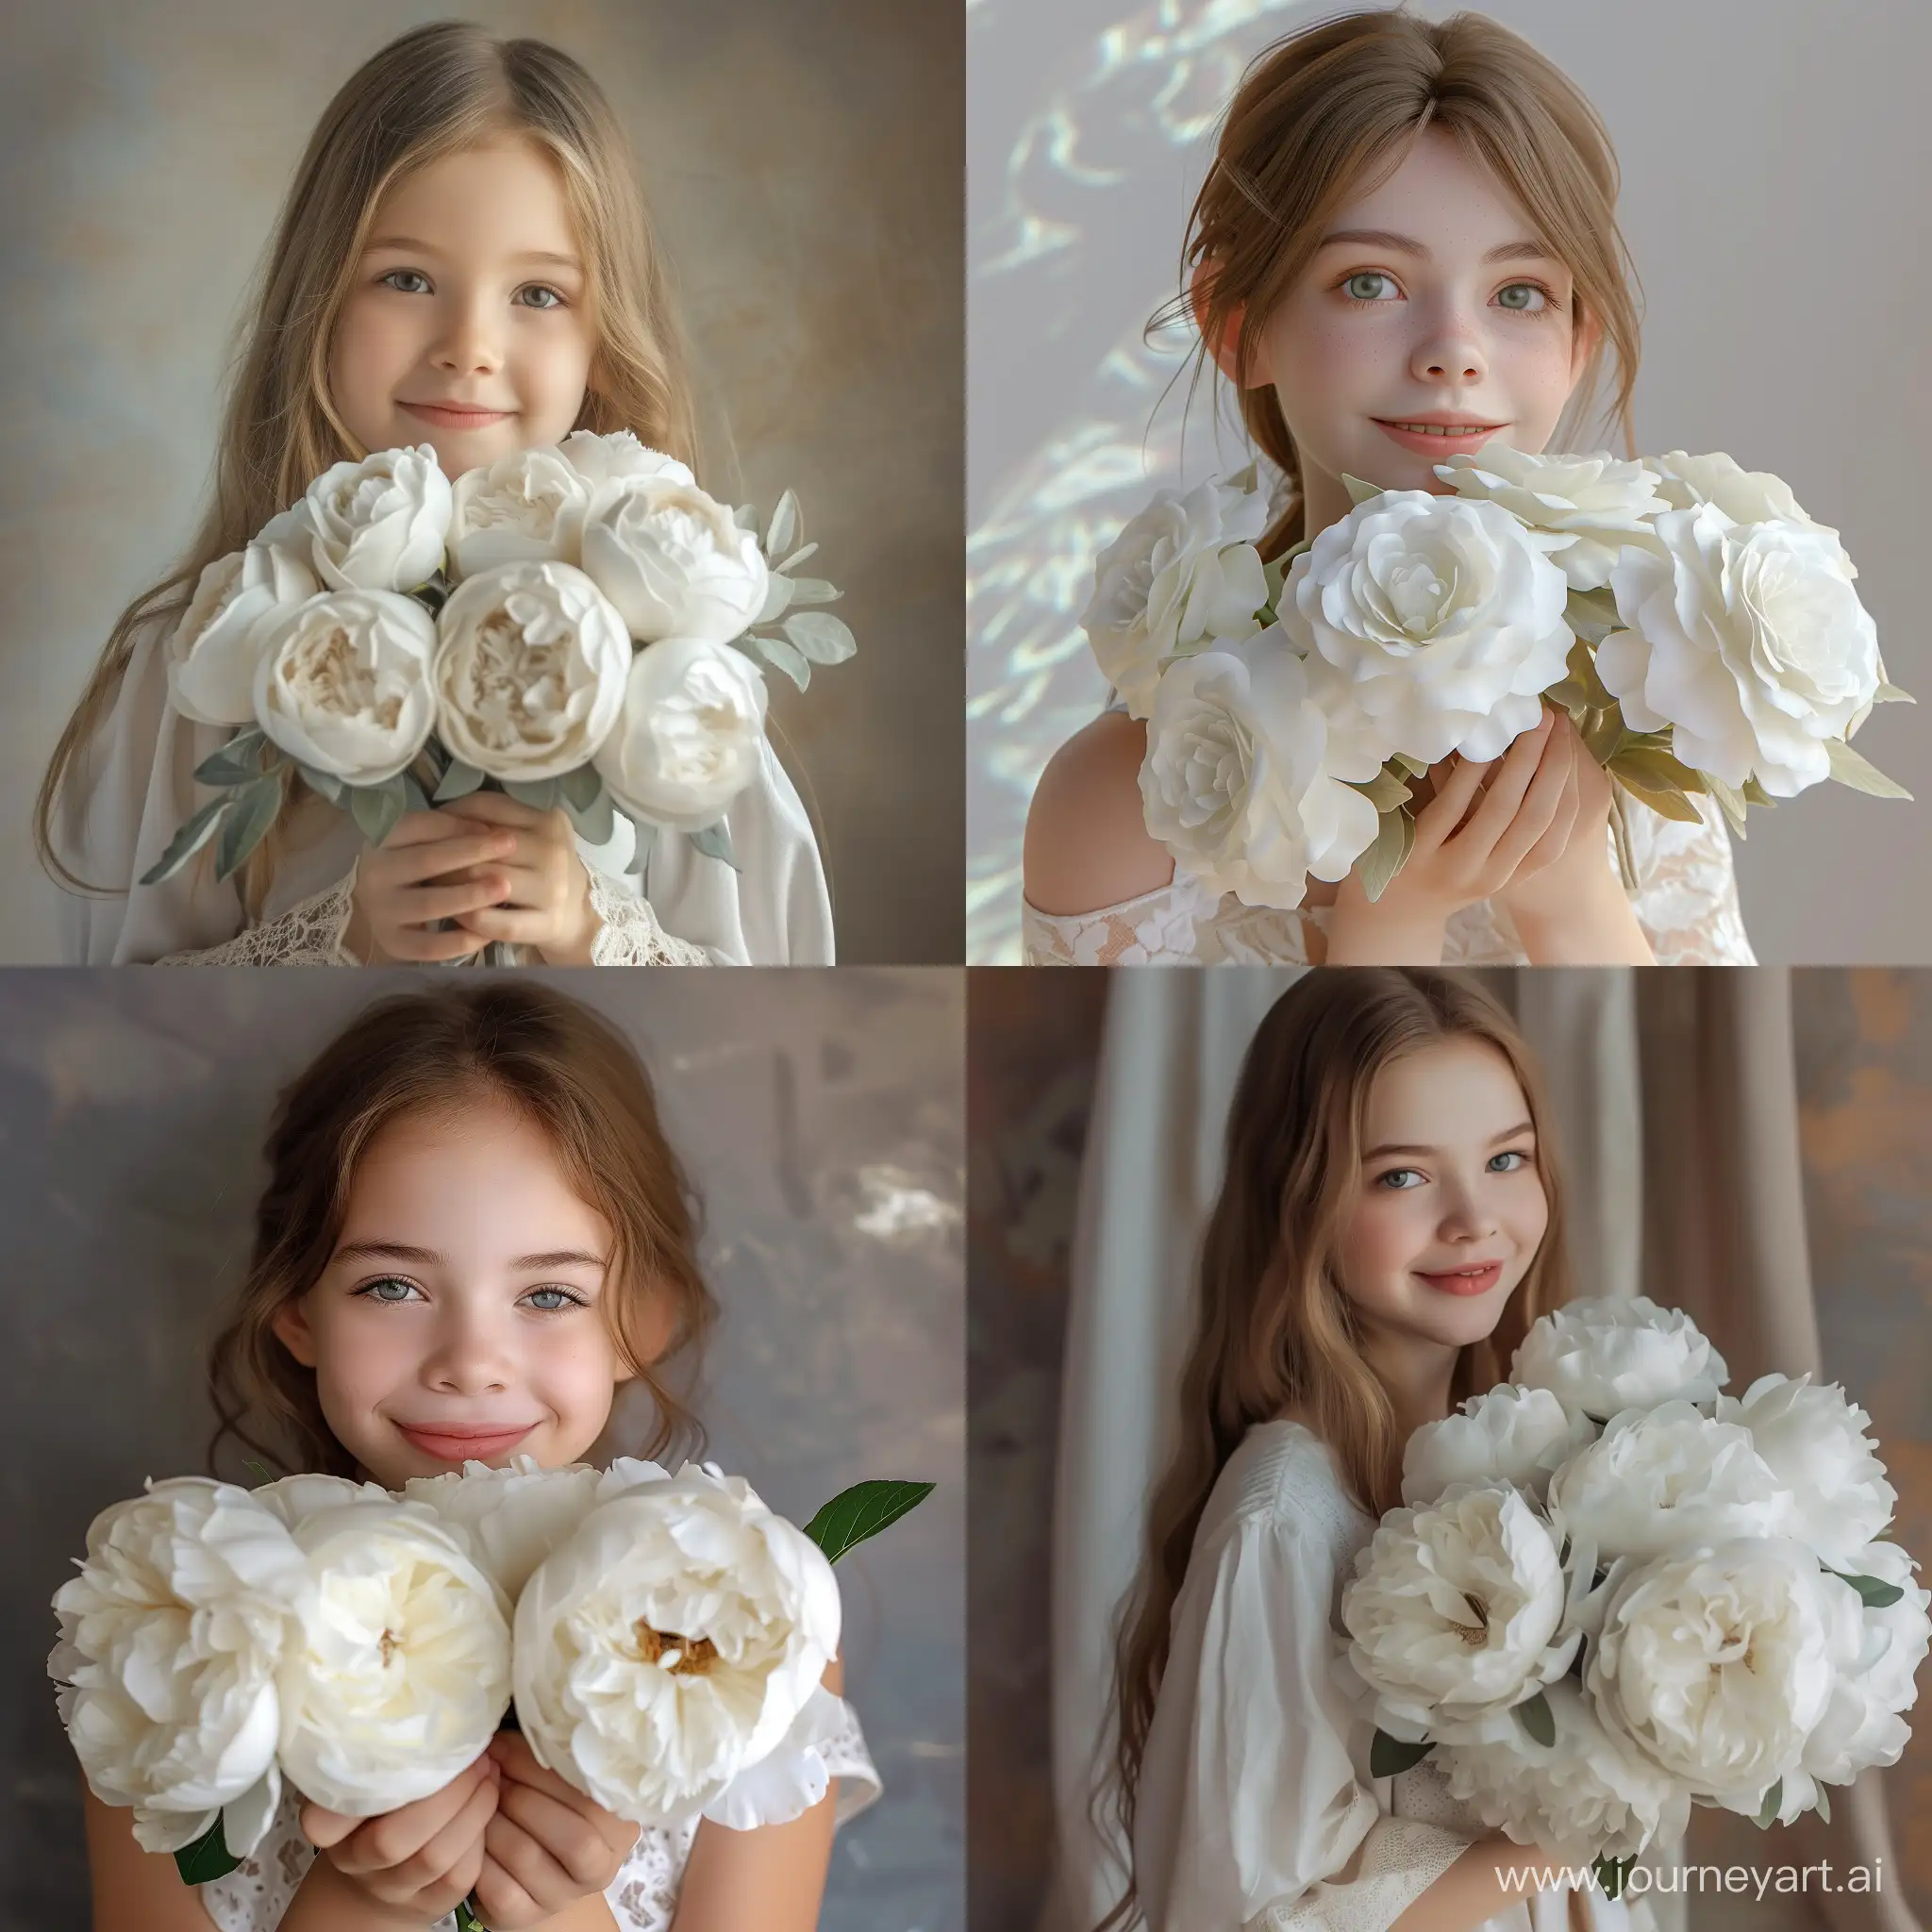 Cheerful-Young-Woman-Holding-White-PeonyLike-Roses-in-Professional-3D-Photo